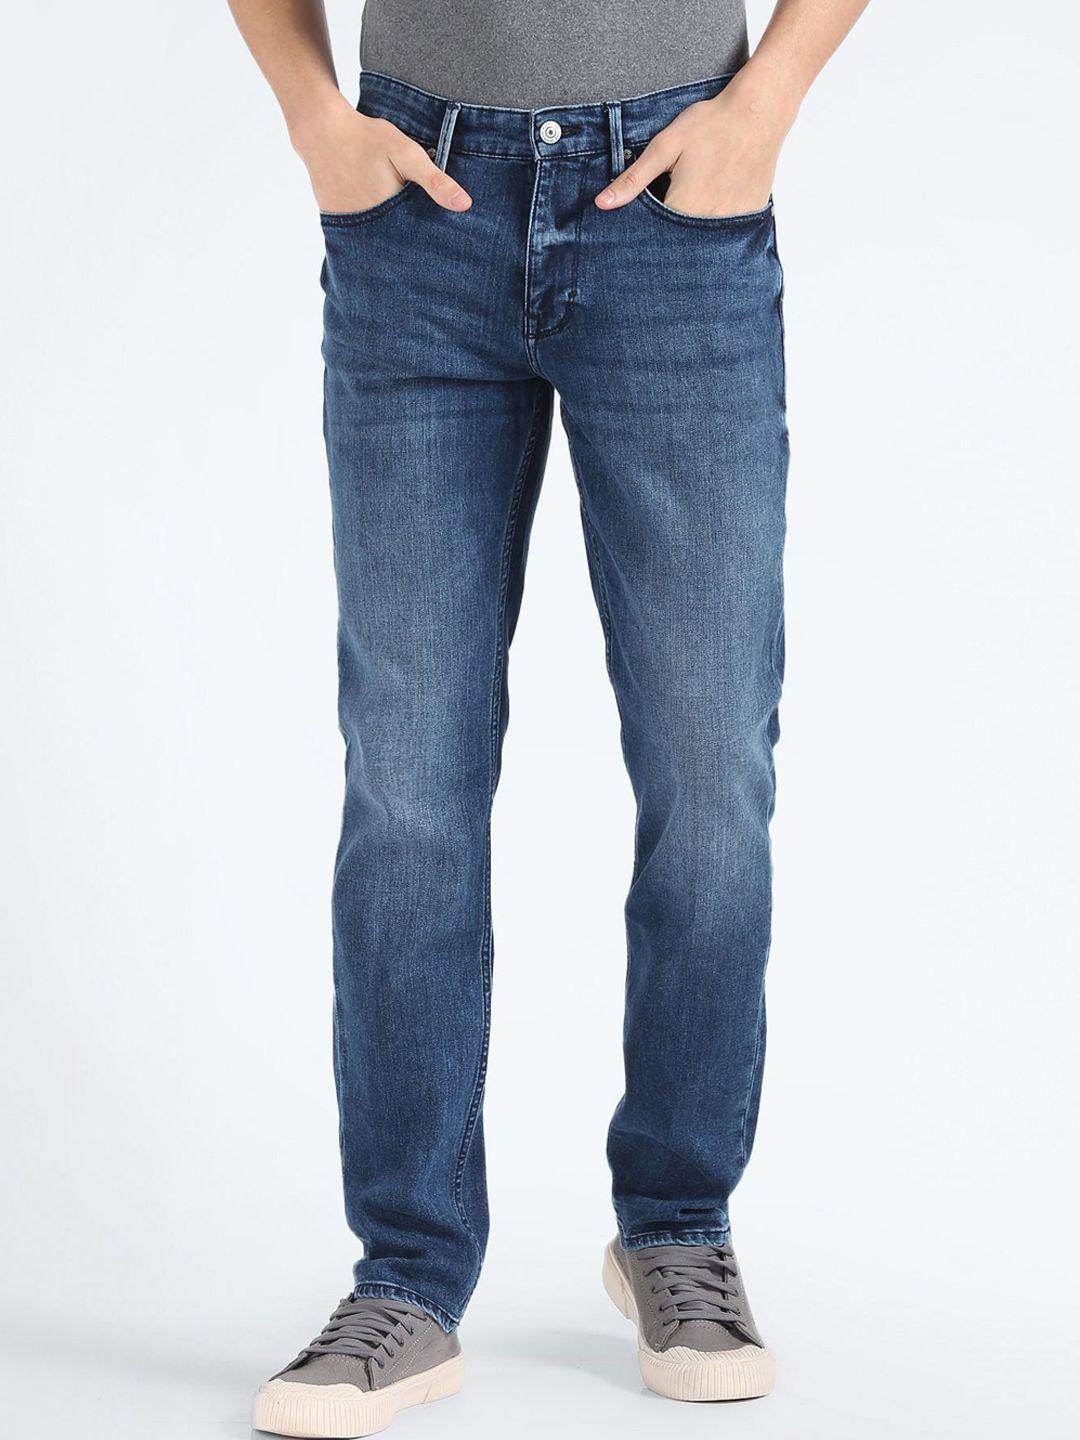 flying-machine-men-slim-fit-clean-look-stretchable-jeans